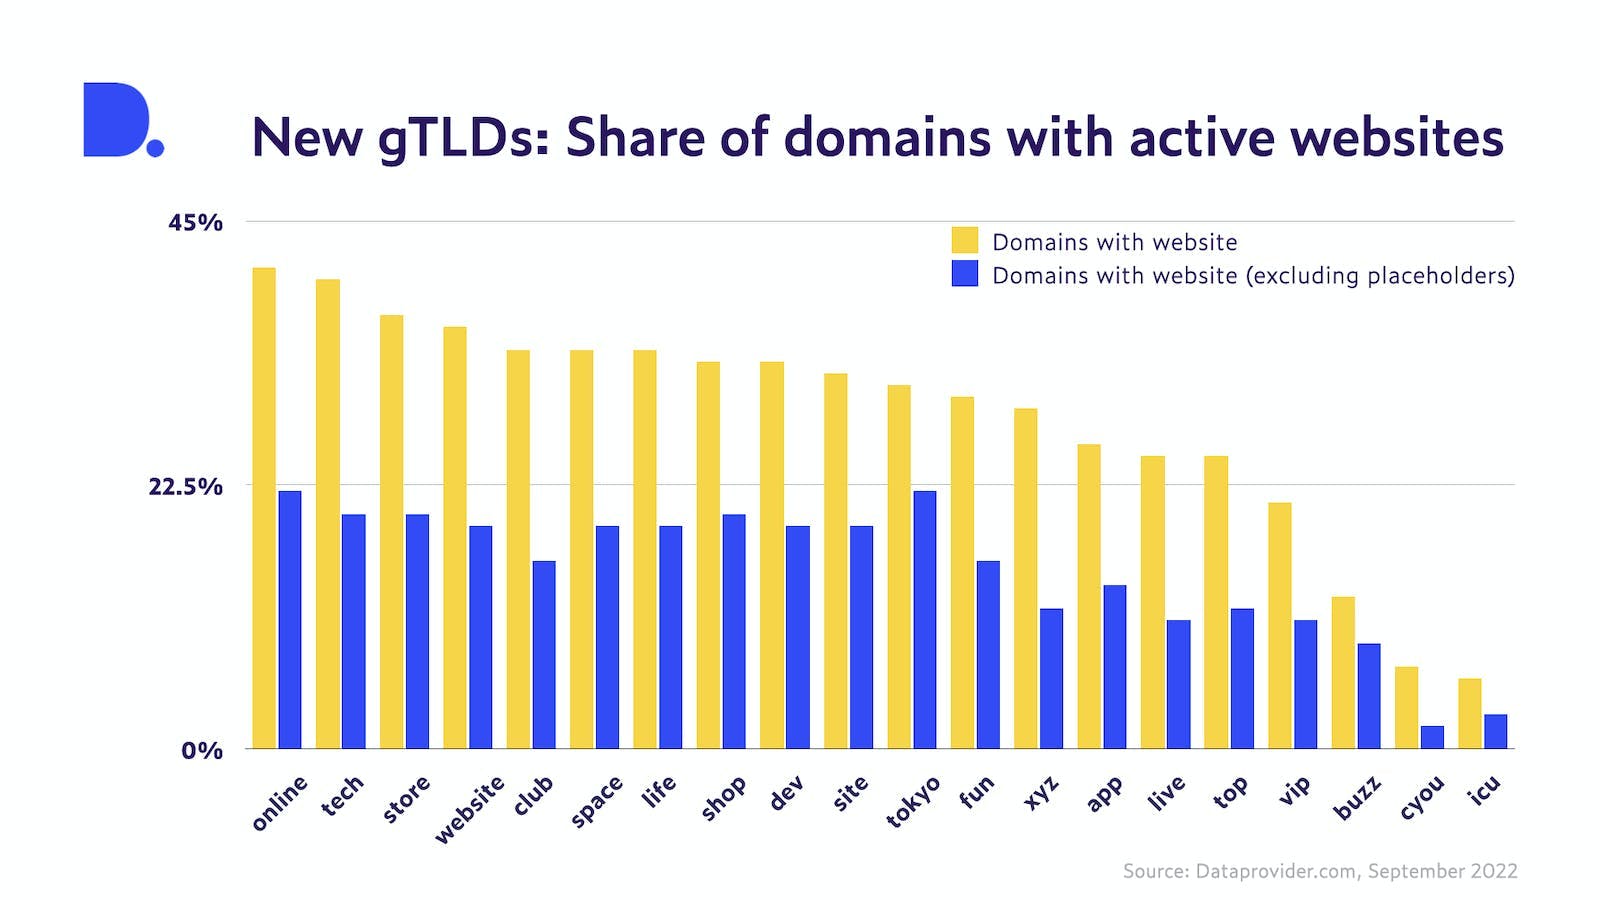 Share of new gTLD domains with active websites